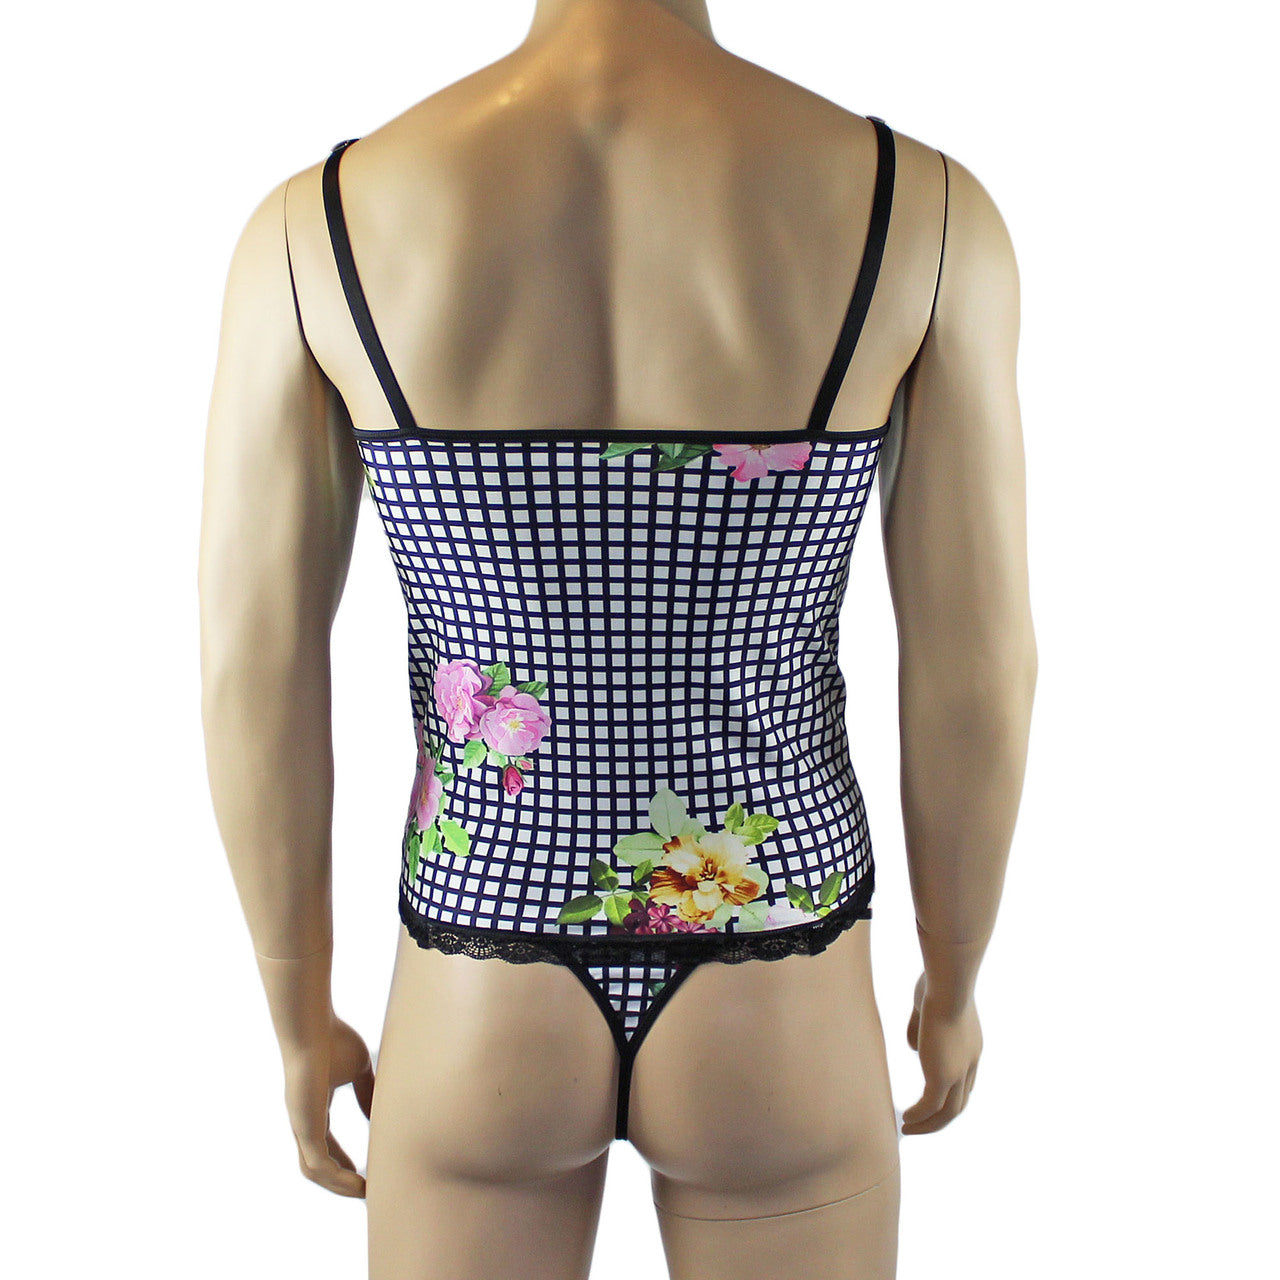 Mens Diana Camisole Corset Top & G string in a Pretty Flower Checkered Print Spandex